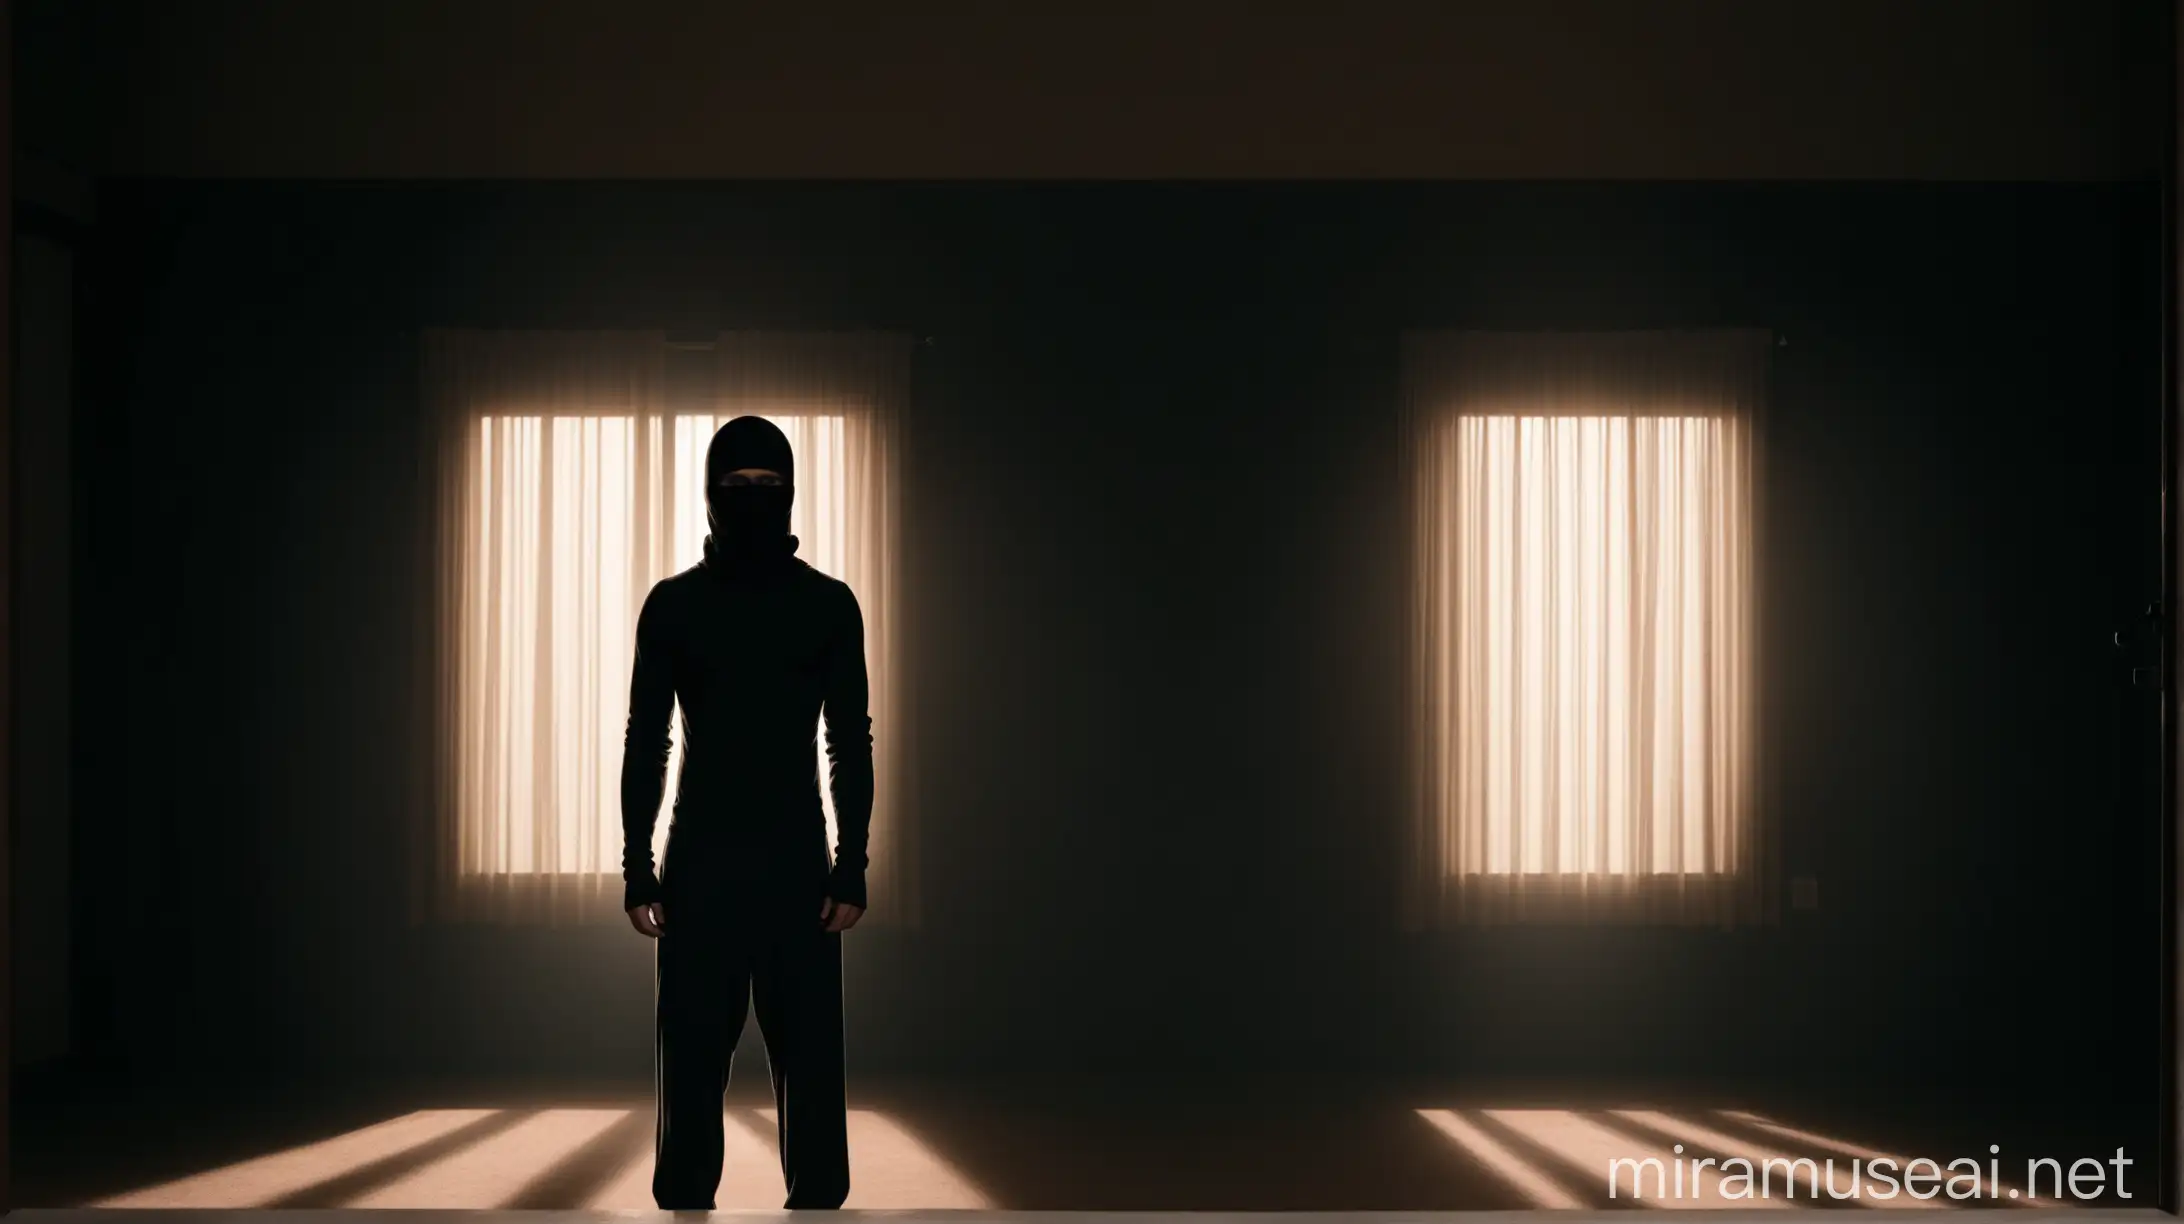 Mysterious Shirtless Man in Balaclava Standing in Dimly Lit Room